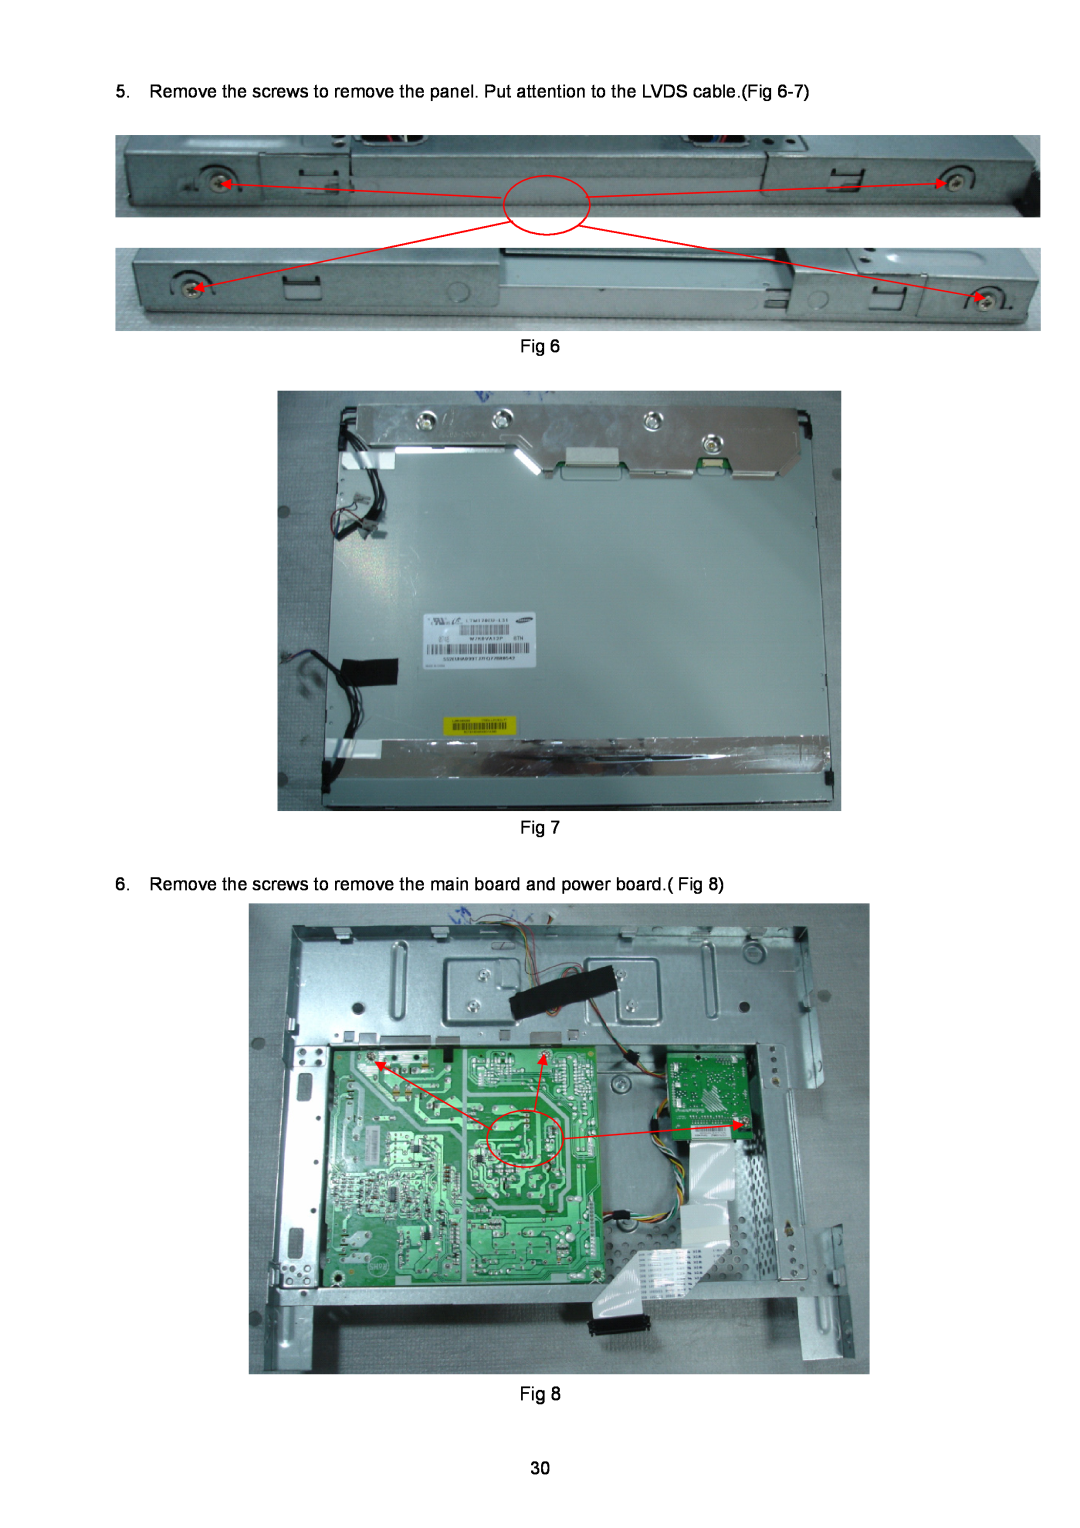 Acer V203W manual Remove the screws to remove the main board and power board. Fig 